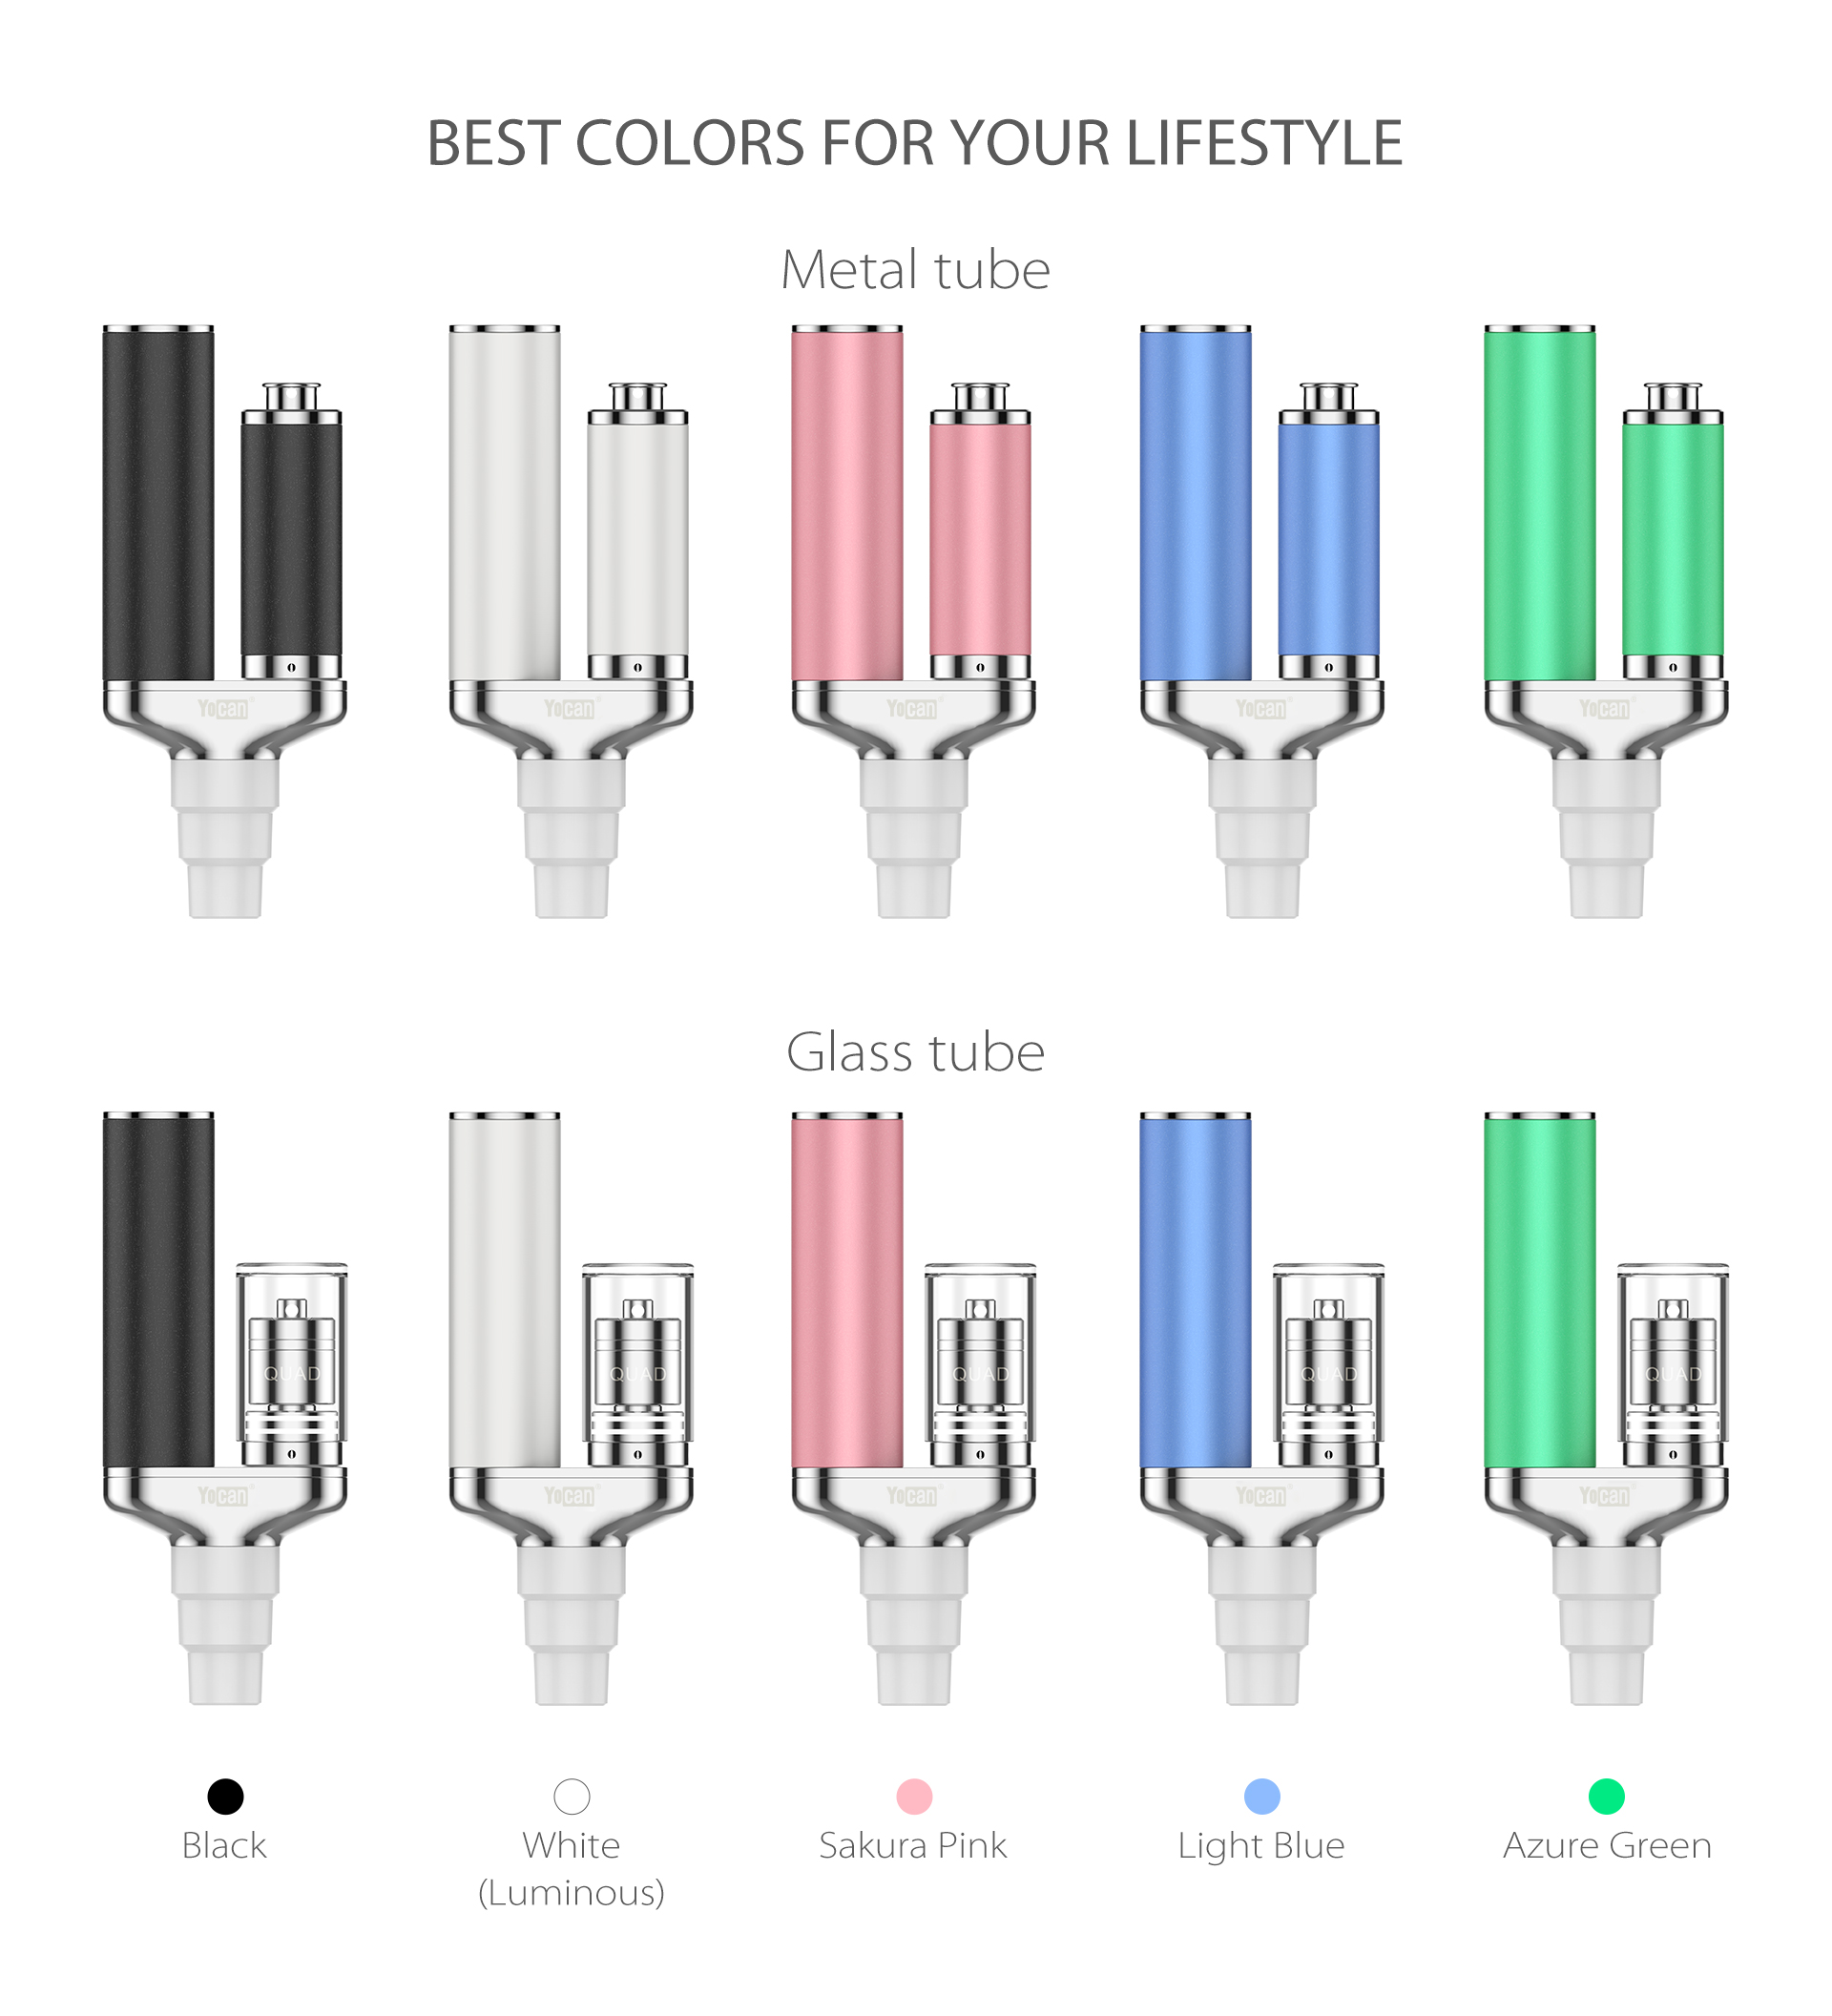 Yocan Torch XL comes with 10 colors.